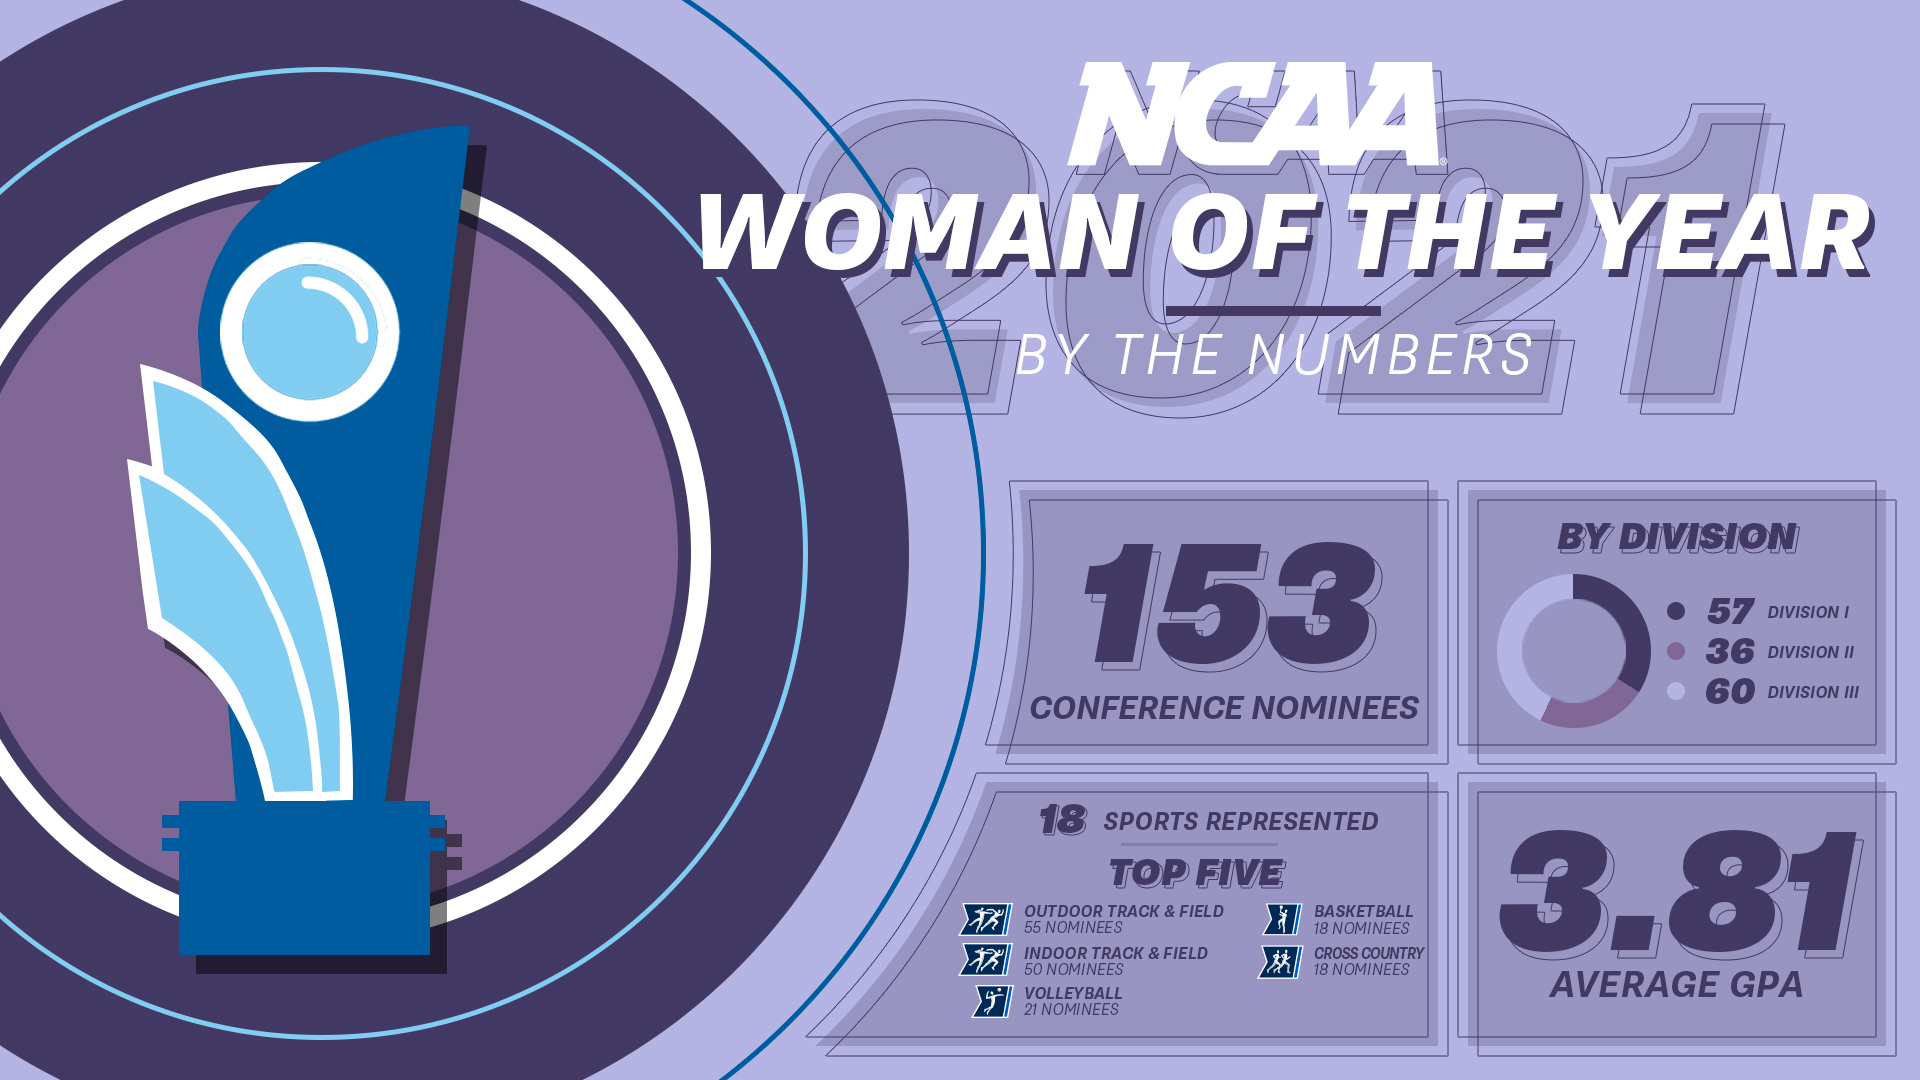 The NCAA has announced nominees for the Woman of the Year award  ©NCAA